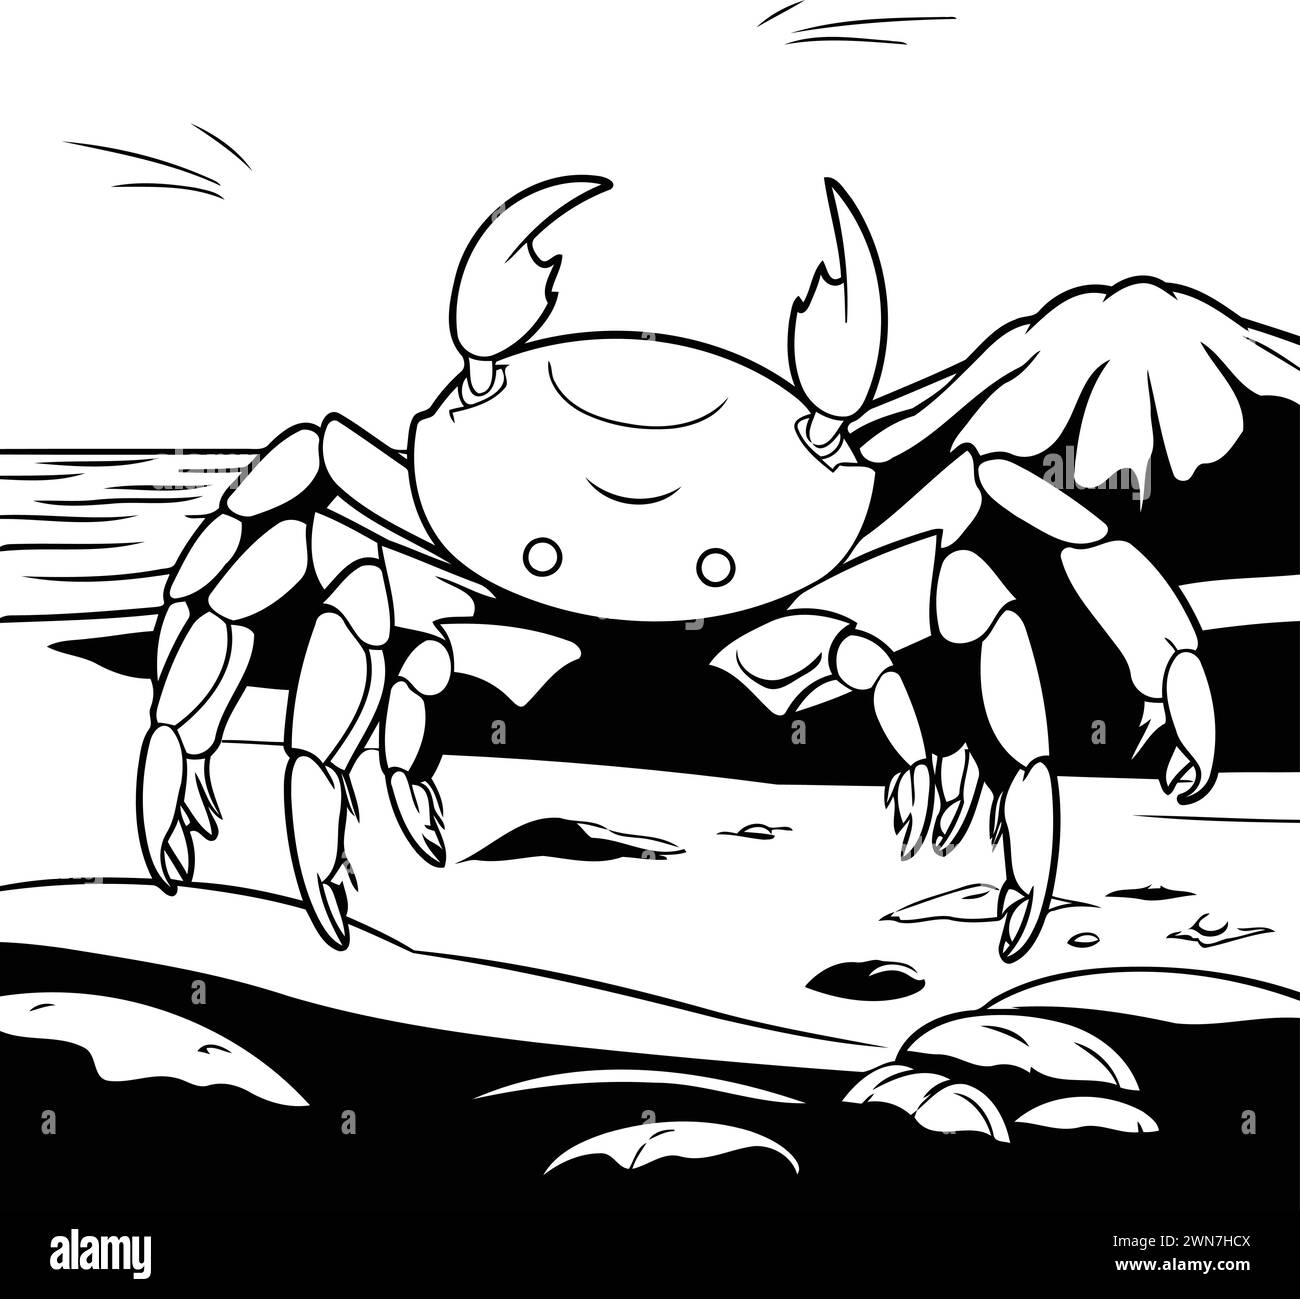 Crab on the beach. Black and white vector illustration for coloring book. Stock Vector